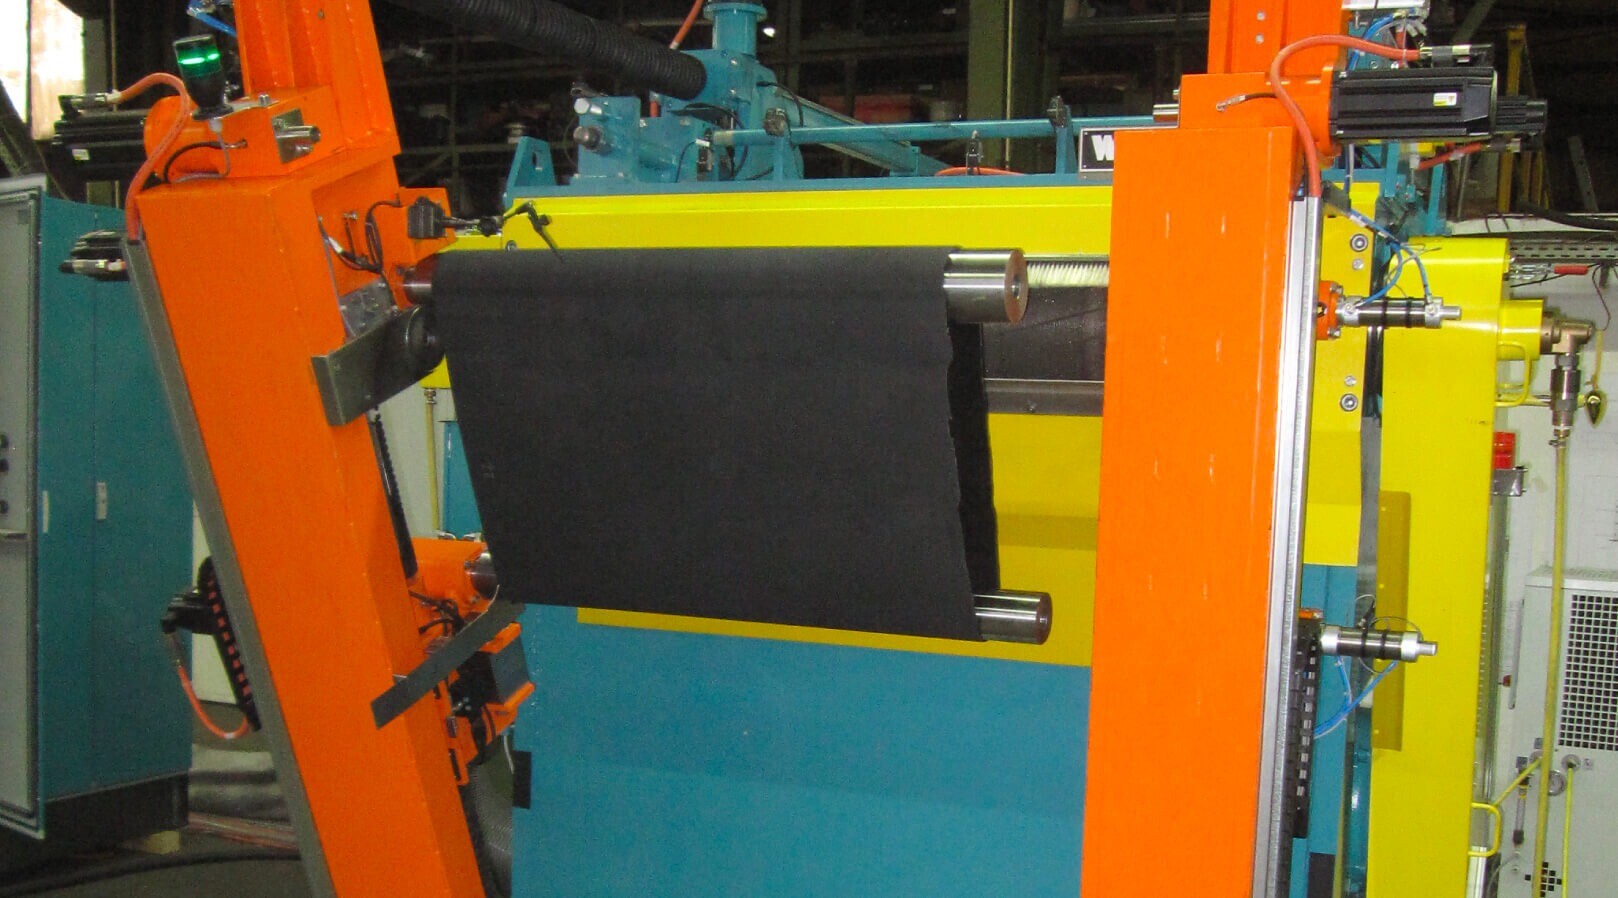 Precision Grinding Machines for Rubber Timing Belts, Toothed Belts that need close tolerances